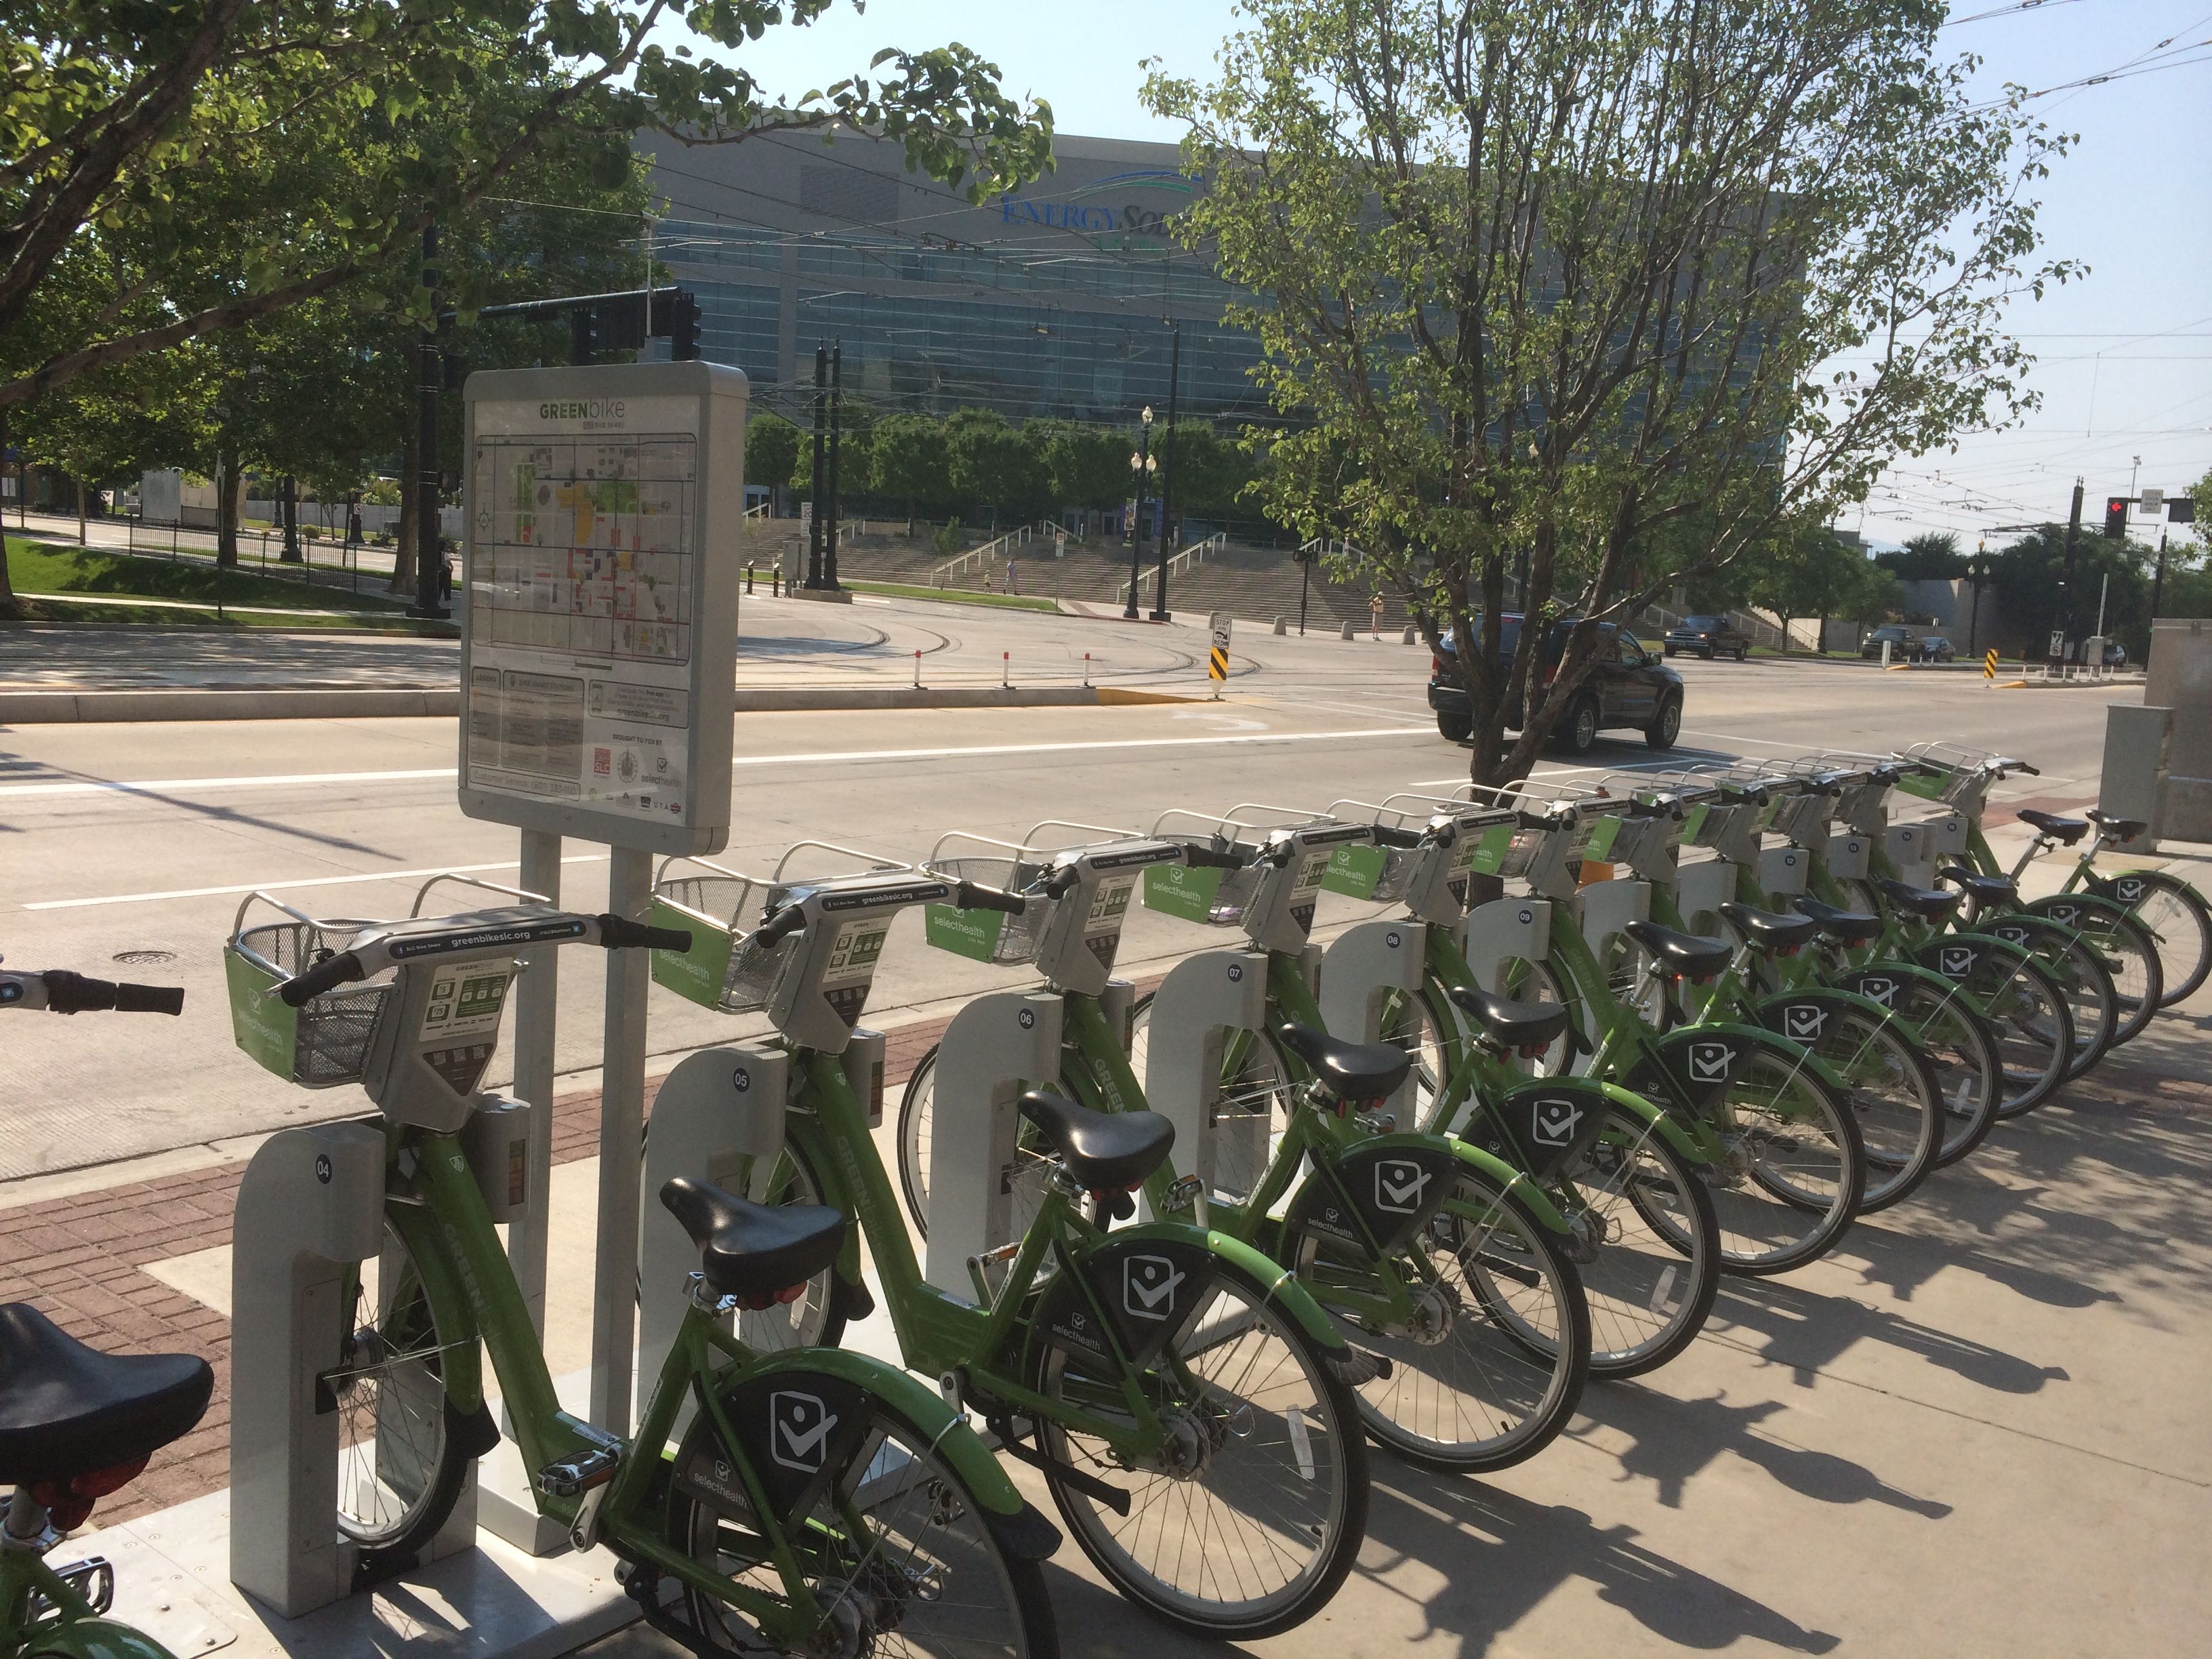 The new Greenbike station at 300 S and 400 E by Cityscape. Photo by Dave Iltis